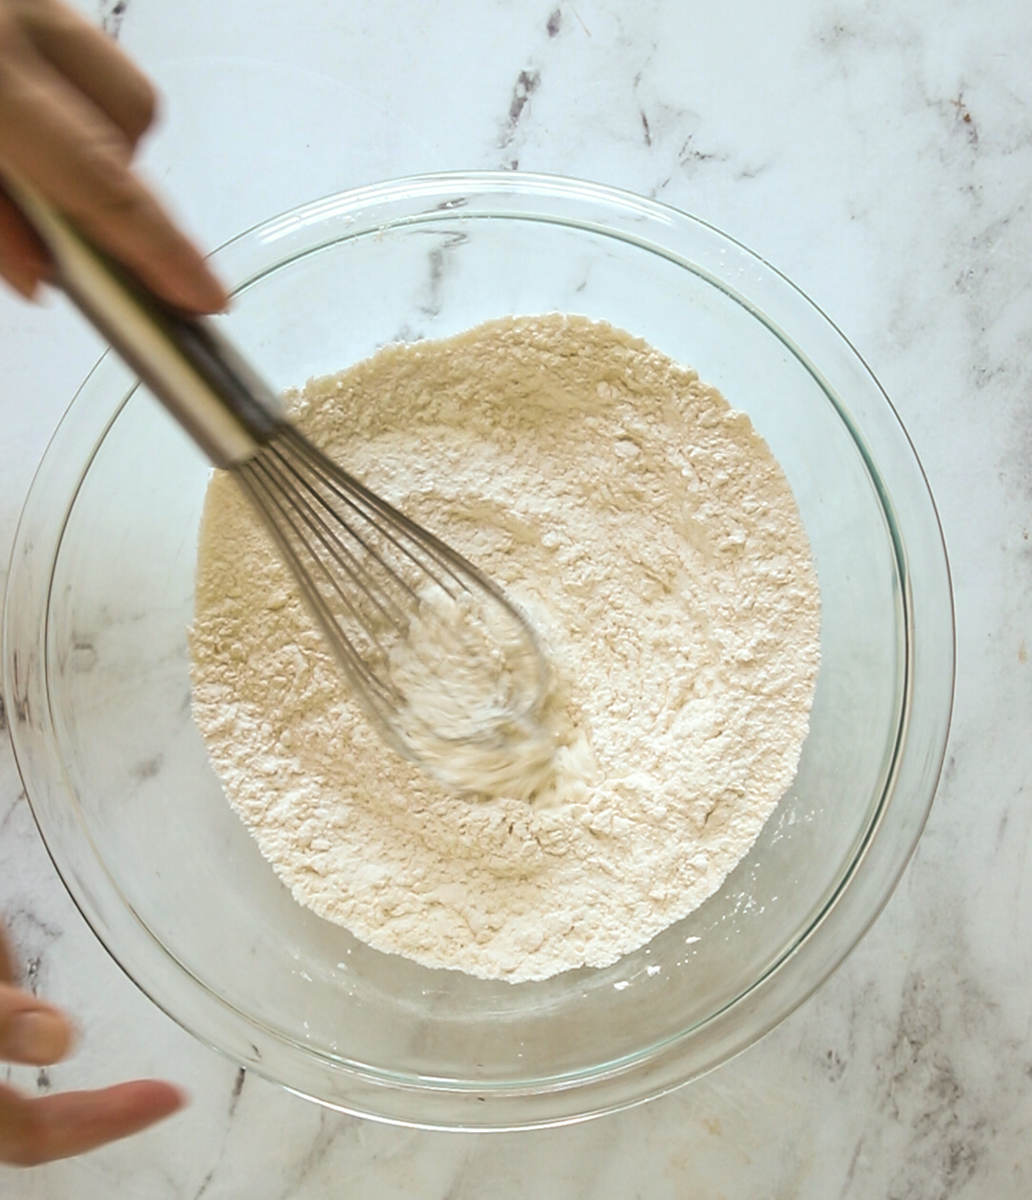 dry ingredients being whisked together